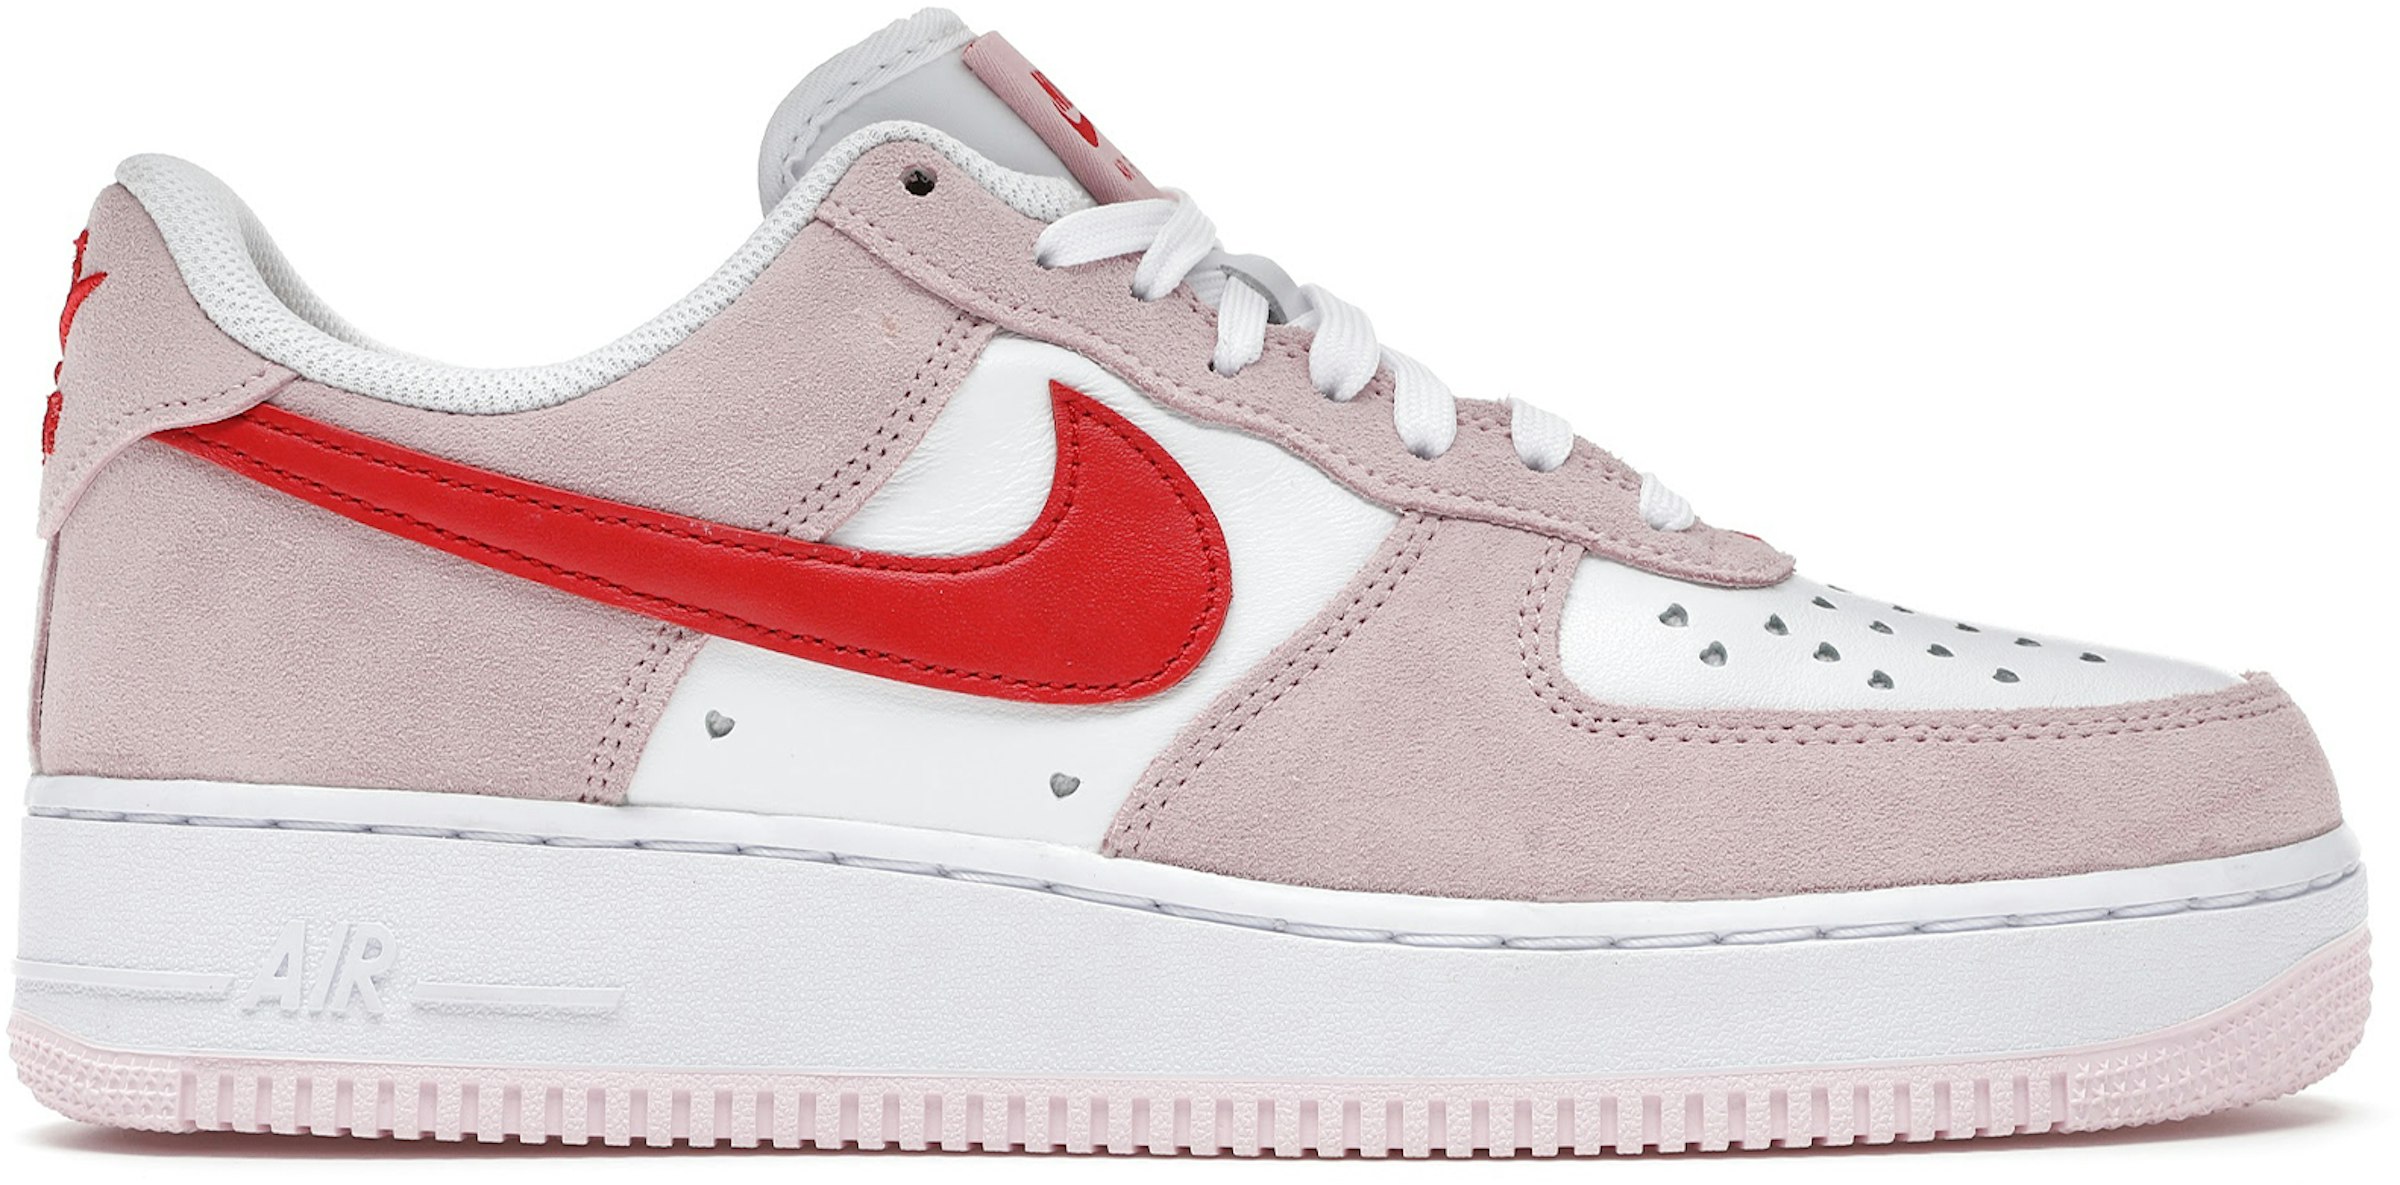 Air Force 1 Low '07 QS Valentine's Day Love Letter - DD3384-600 - US